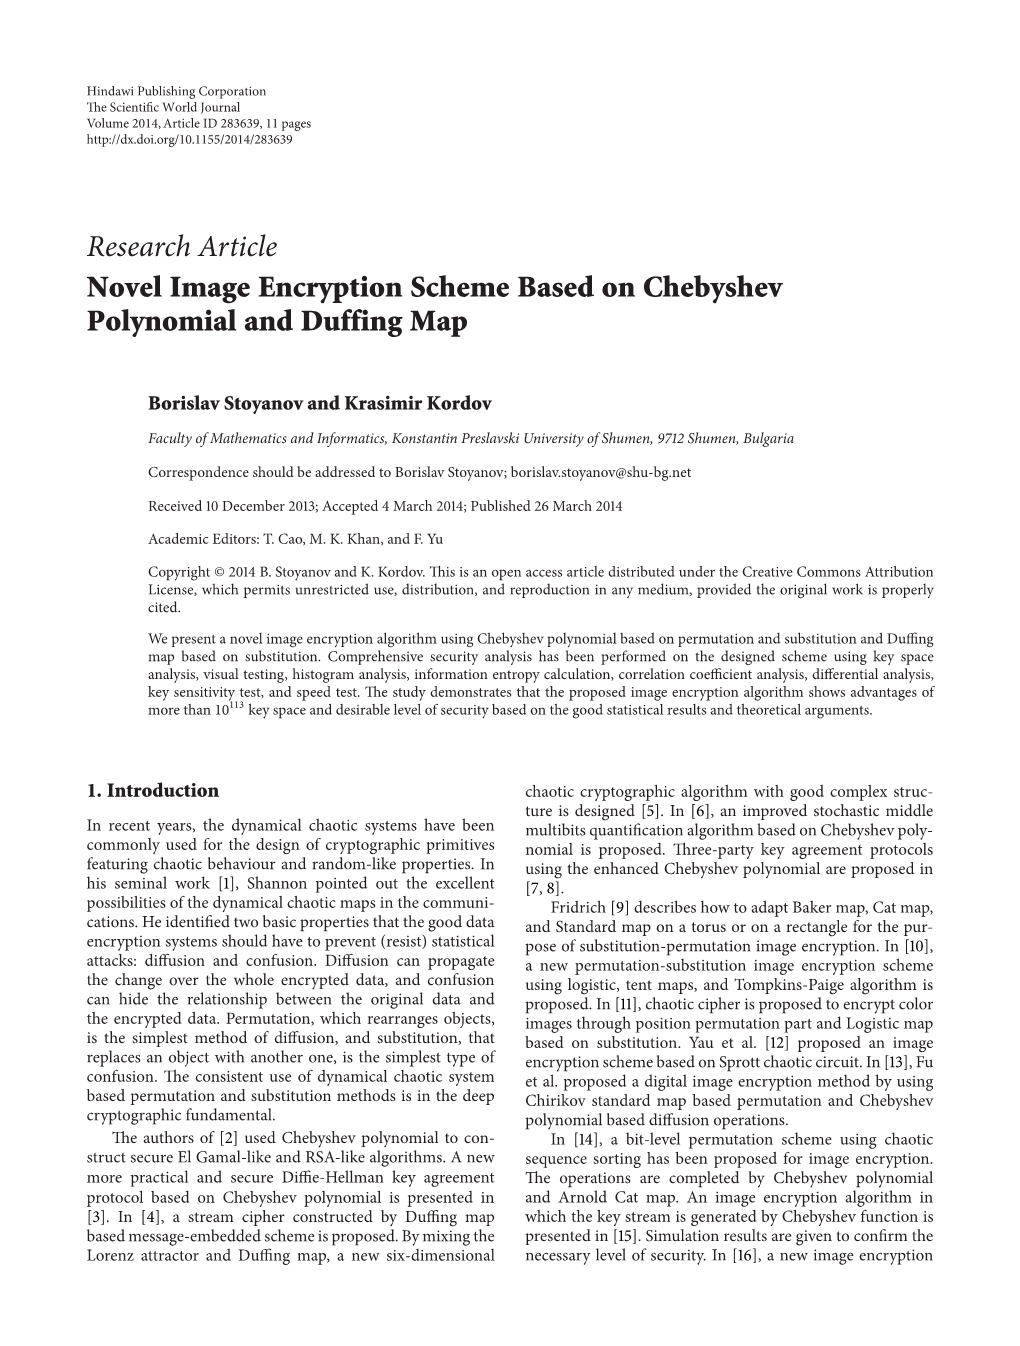 Research Article Novel Image Encryption Scheme Based on Chebyshev Polynomial and Duffing Map